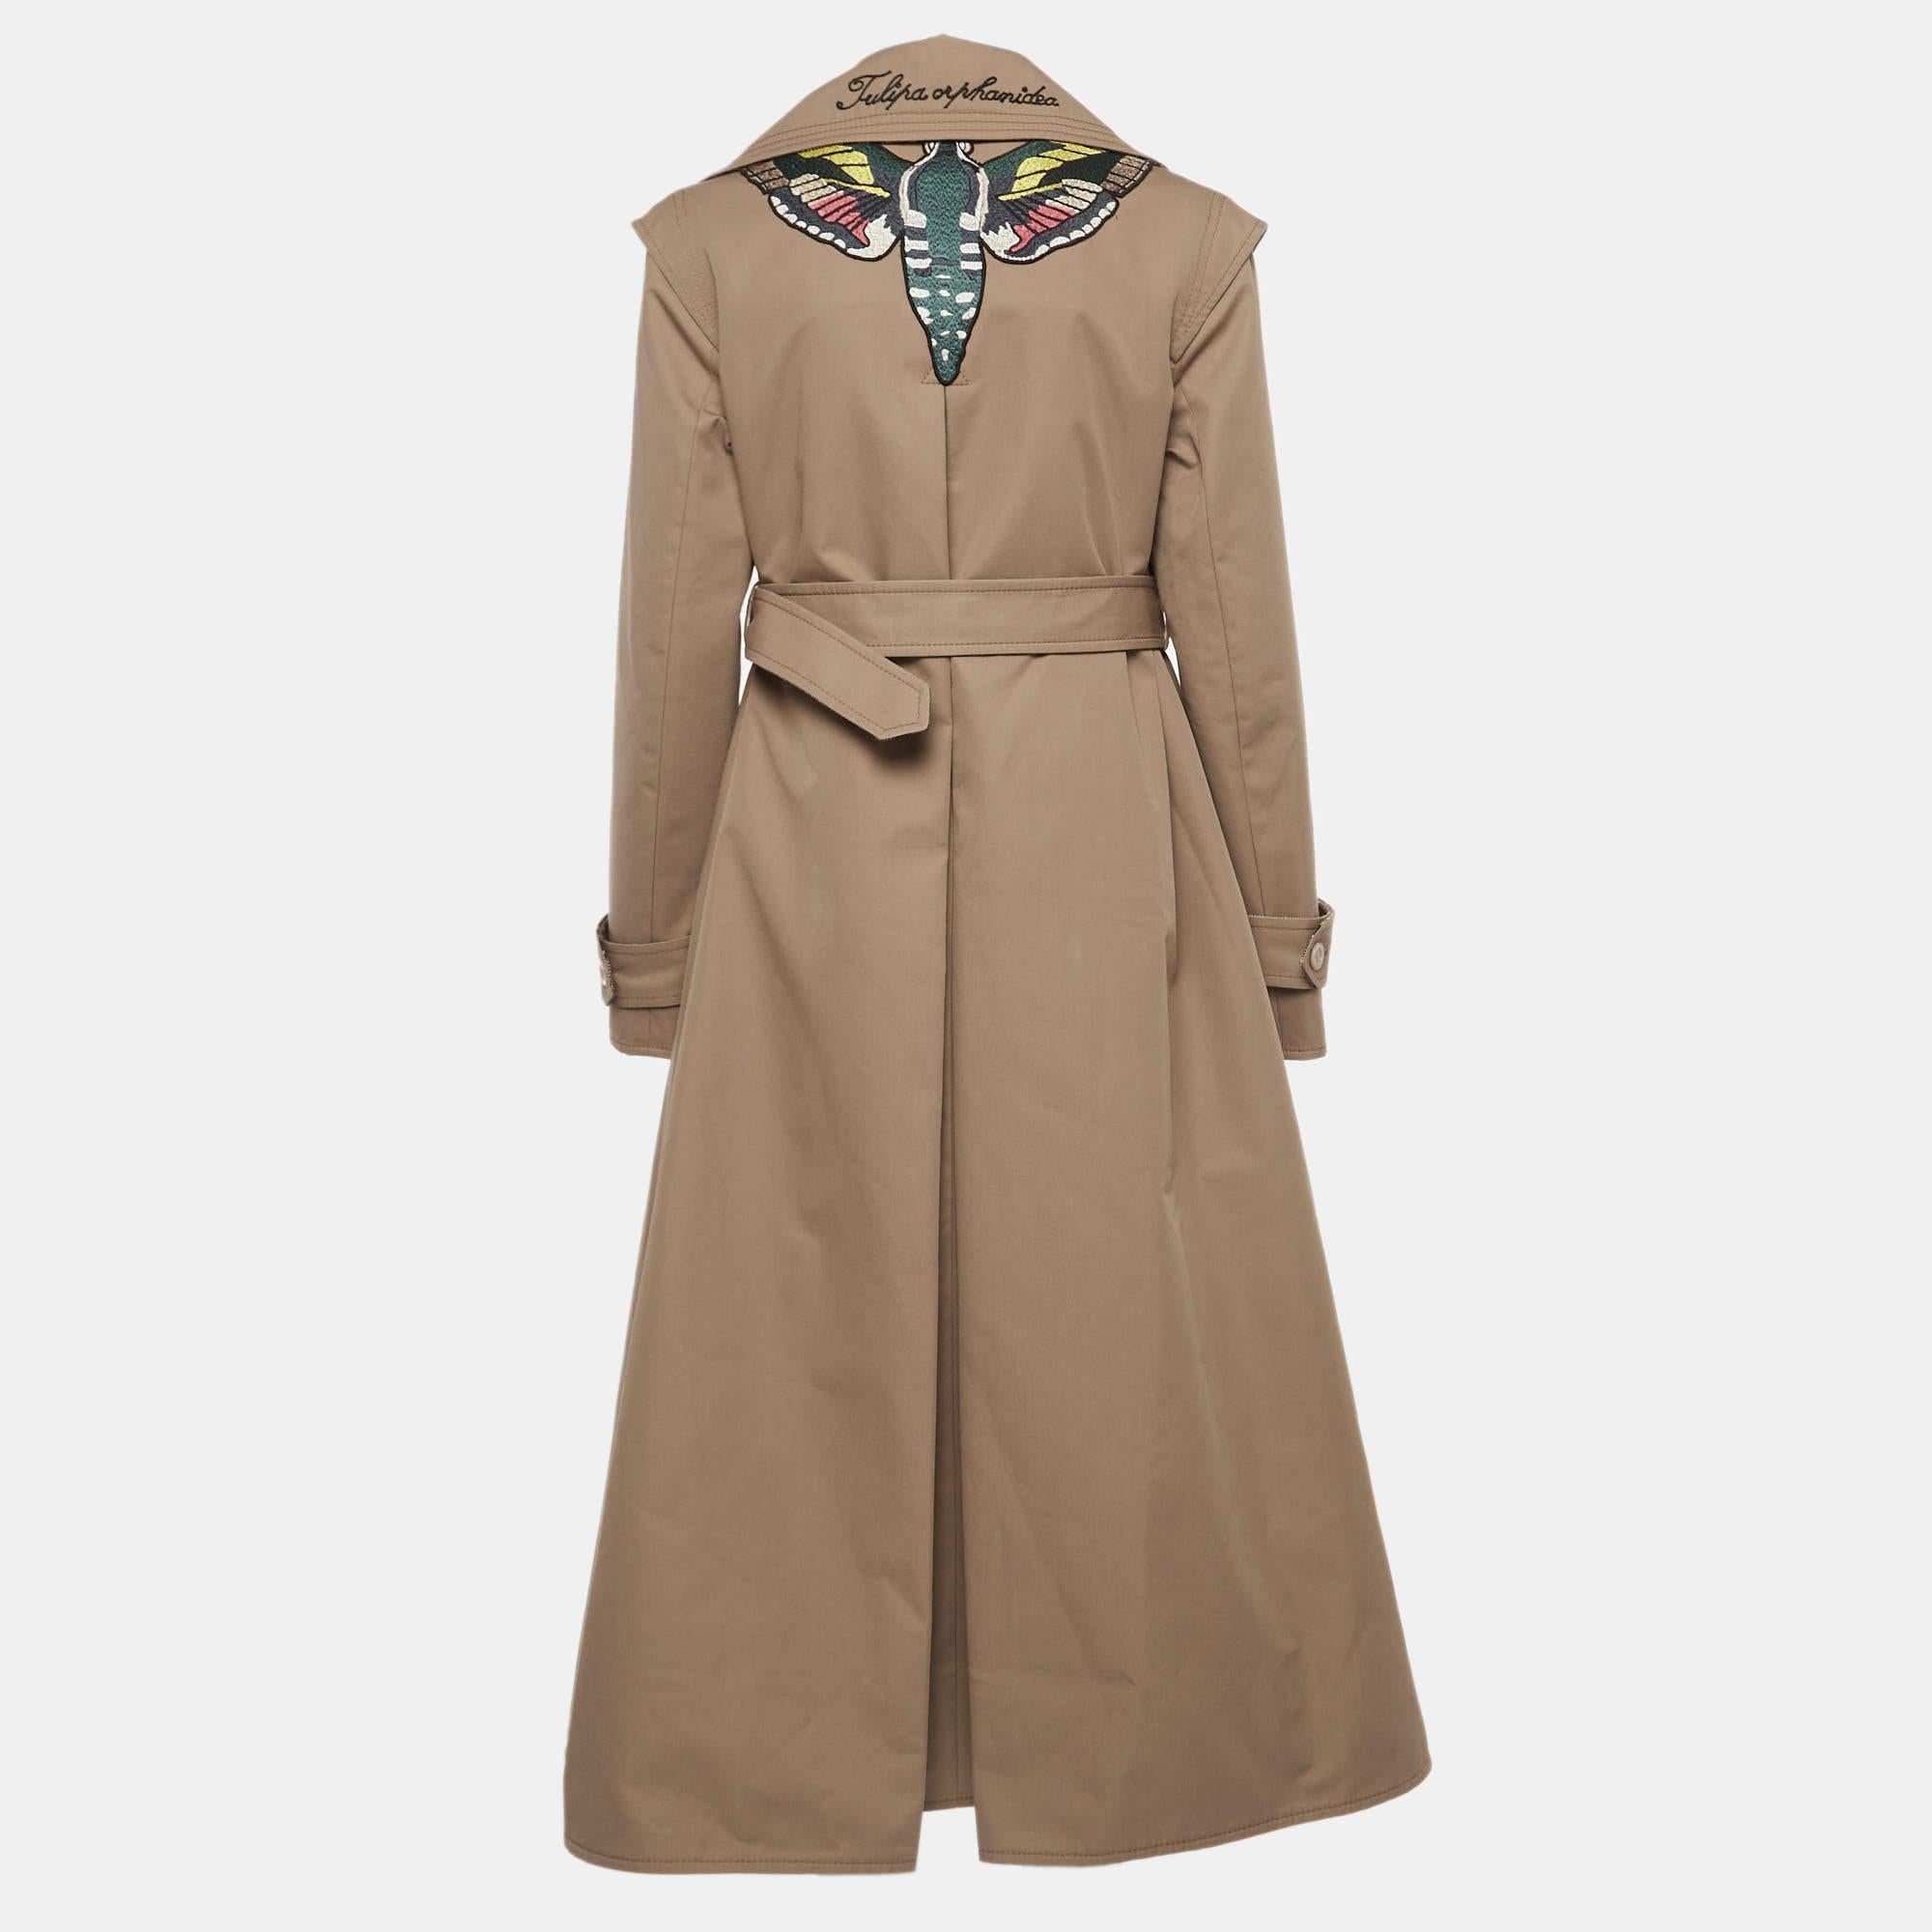 The Gucci trench coat is a luxurious and iconic outerwear piece. Crafted from high-quality gabardine, it features exquisite butterfly embroidery at the back, adding a whimsical touch. The trench coat showcases Gucci's signature style, blending